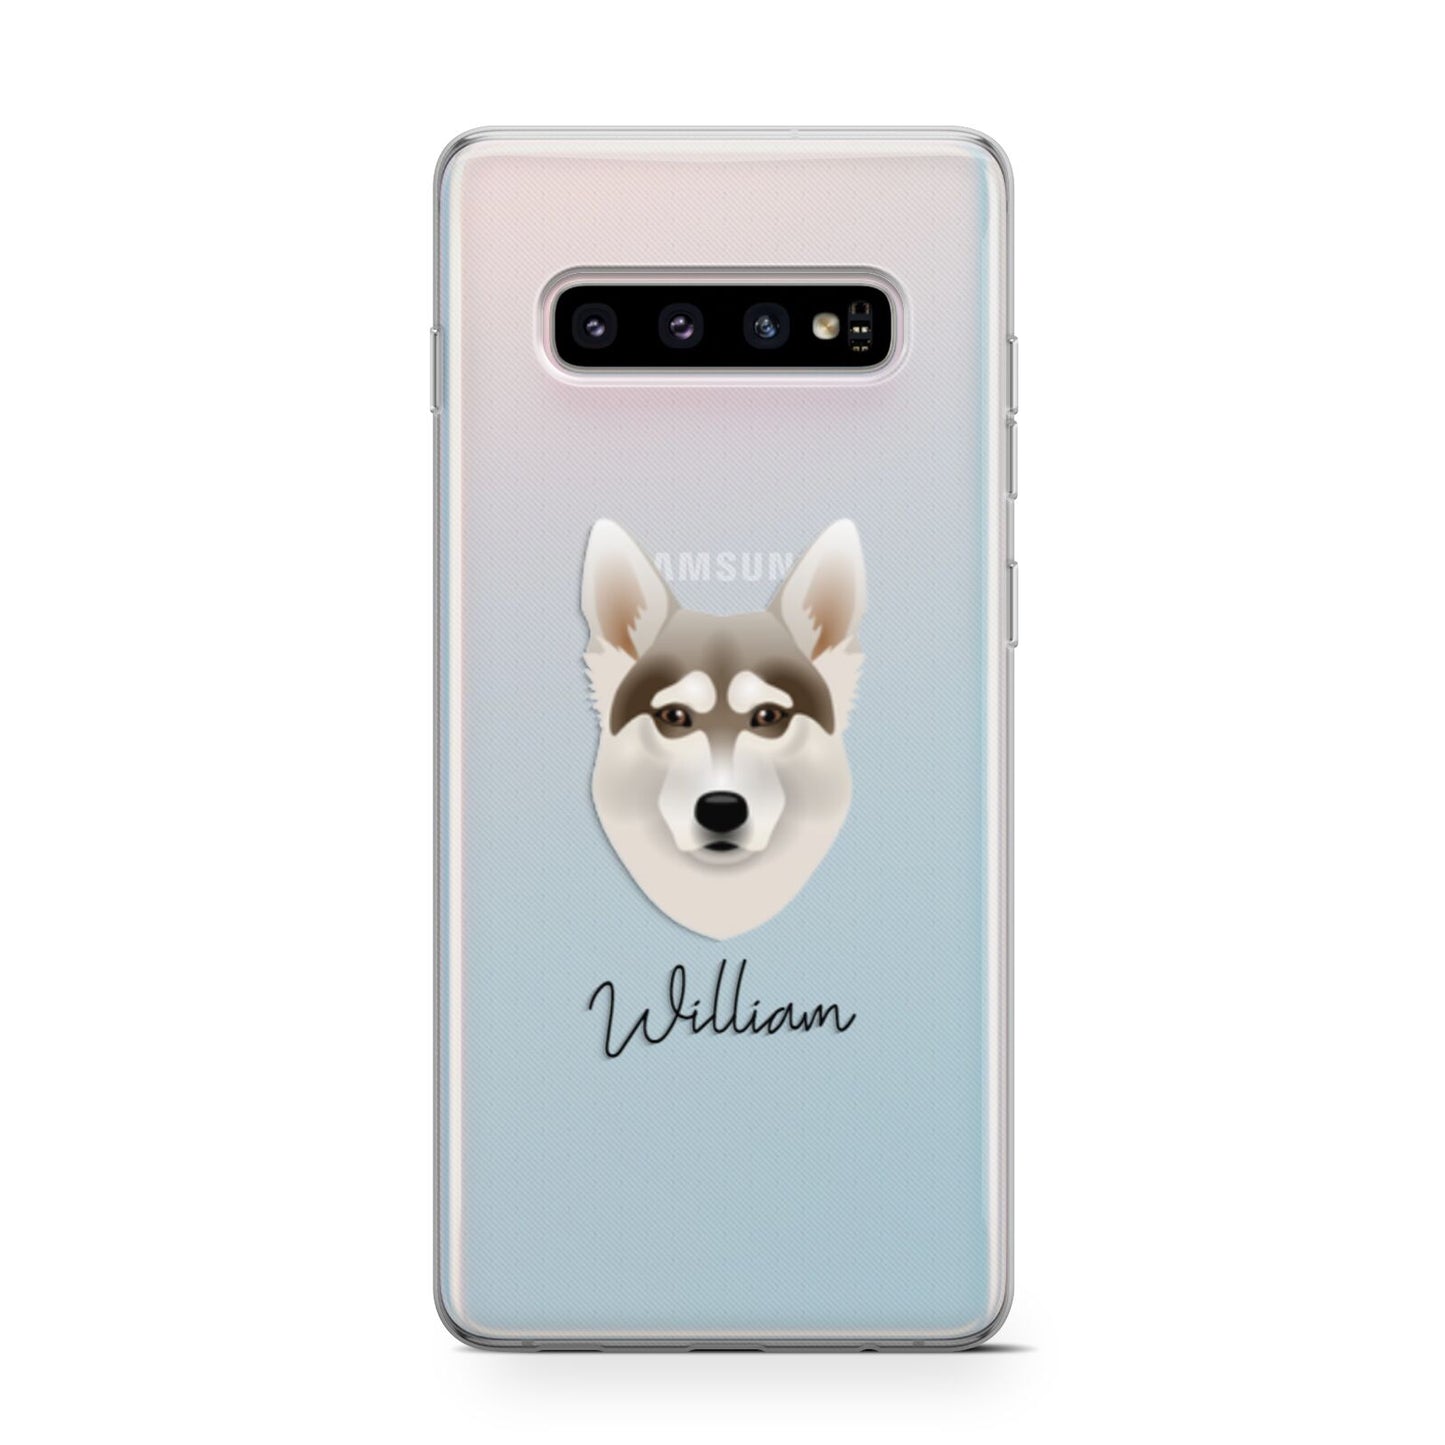 Northern Inuit Personalised Samsung Galaxy S10 Case